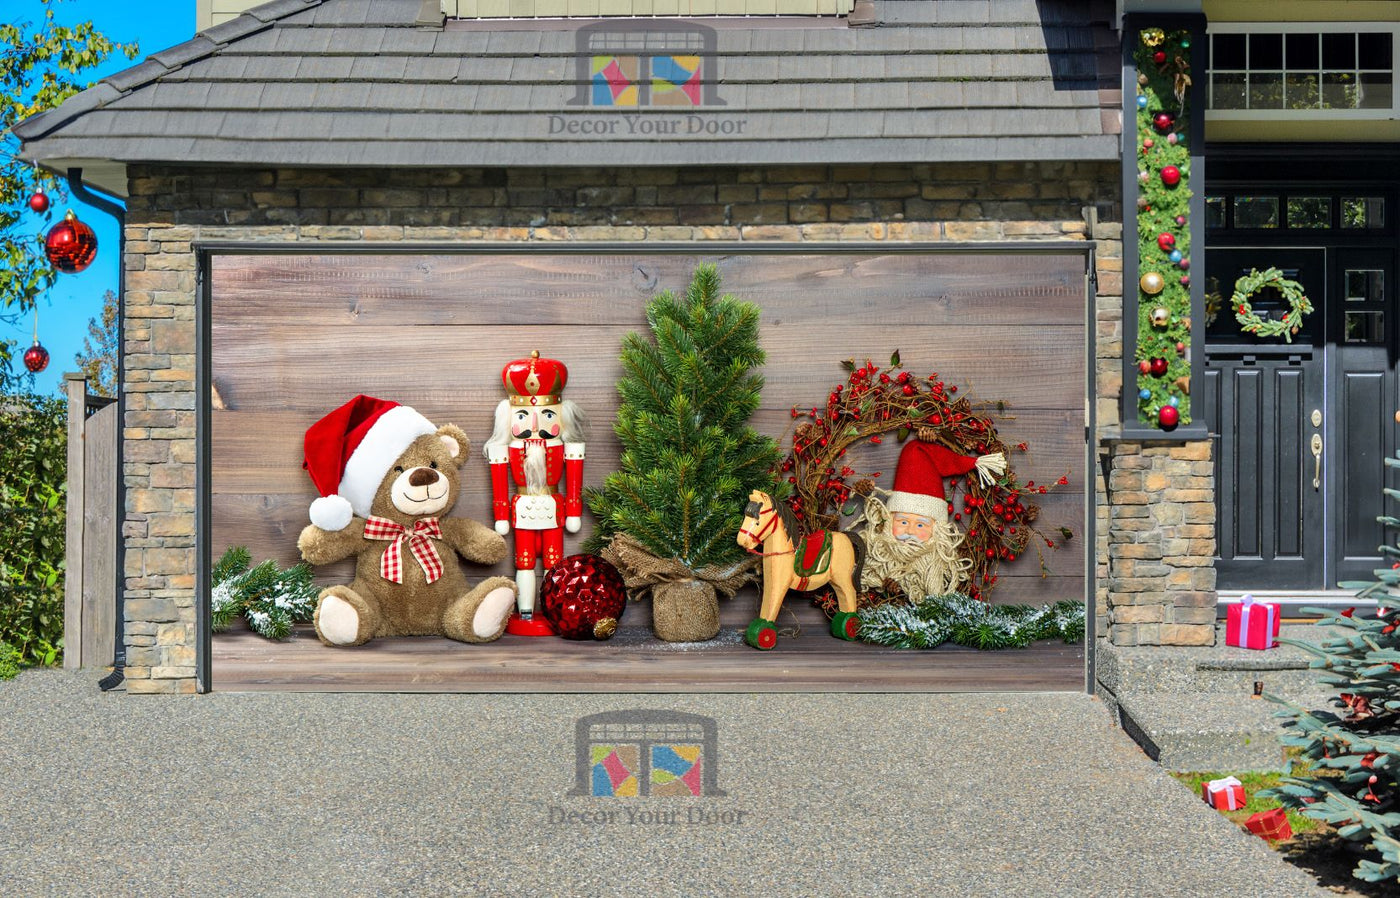 Christmas Decoration With Toys Teddy Bear And Nutcracker Garage Door Wrap Cover Mural Decoration